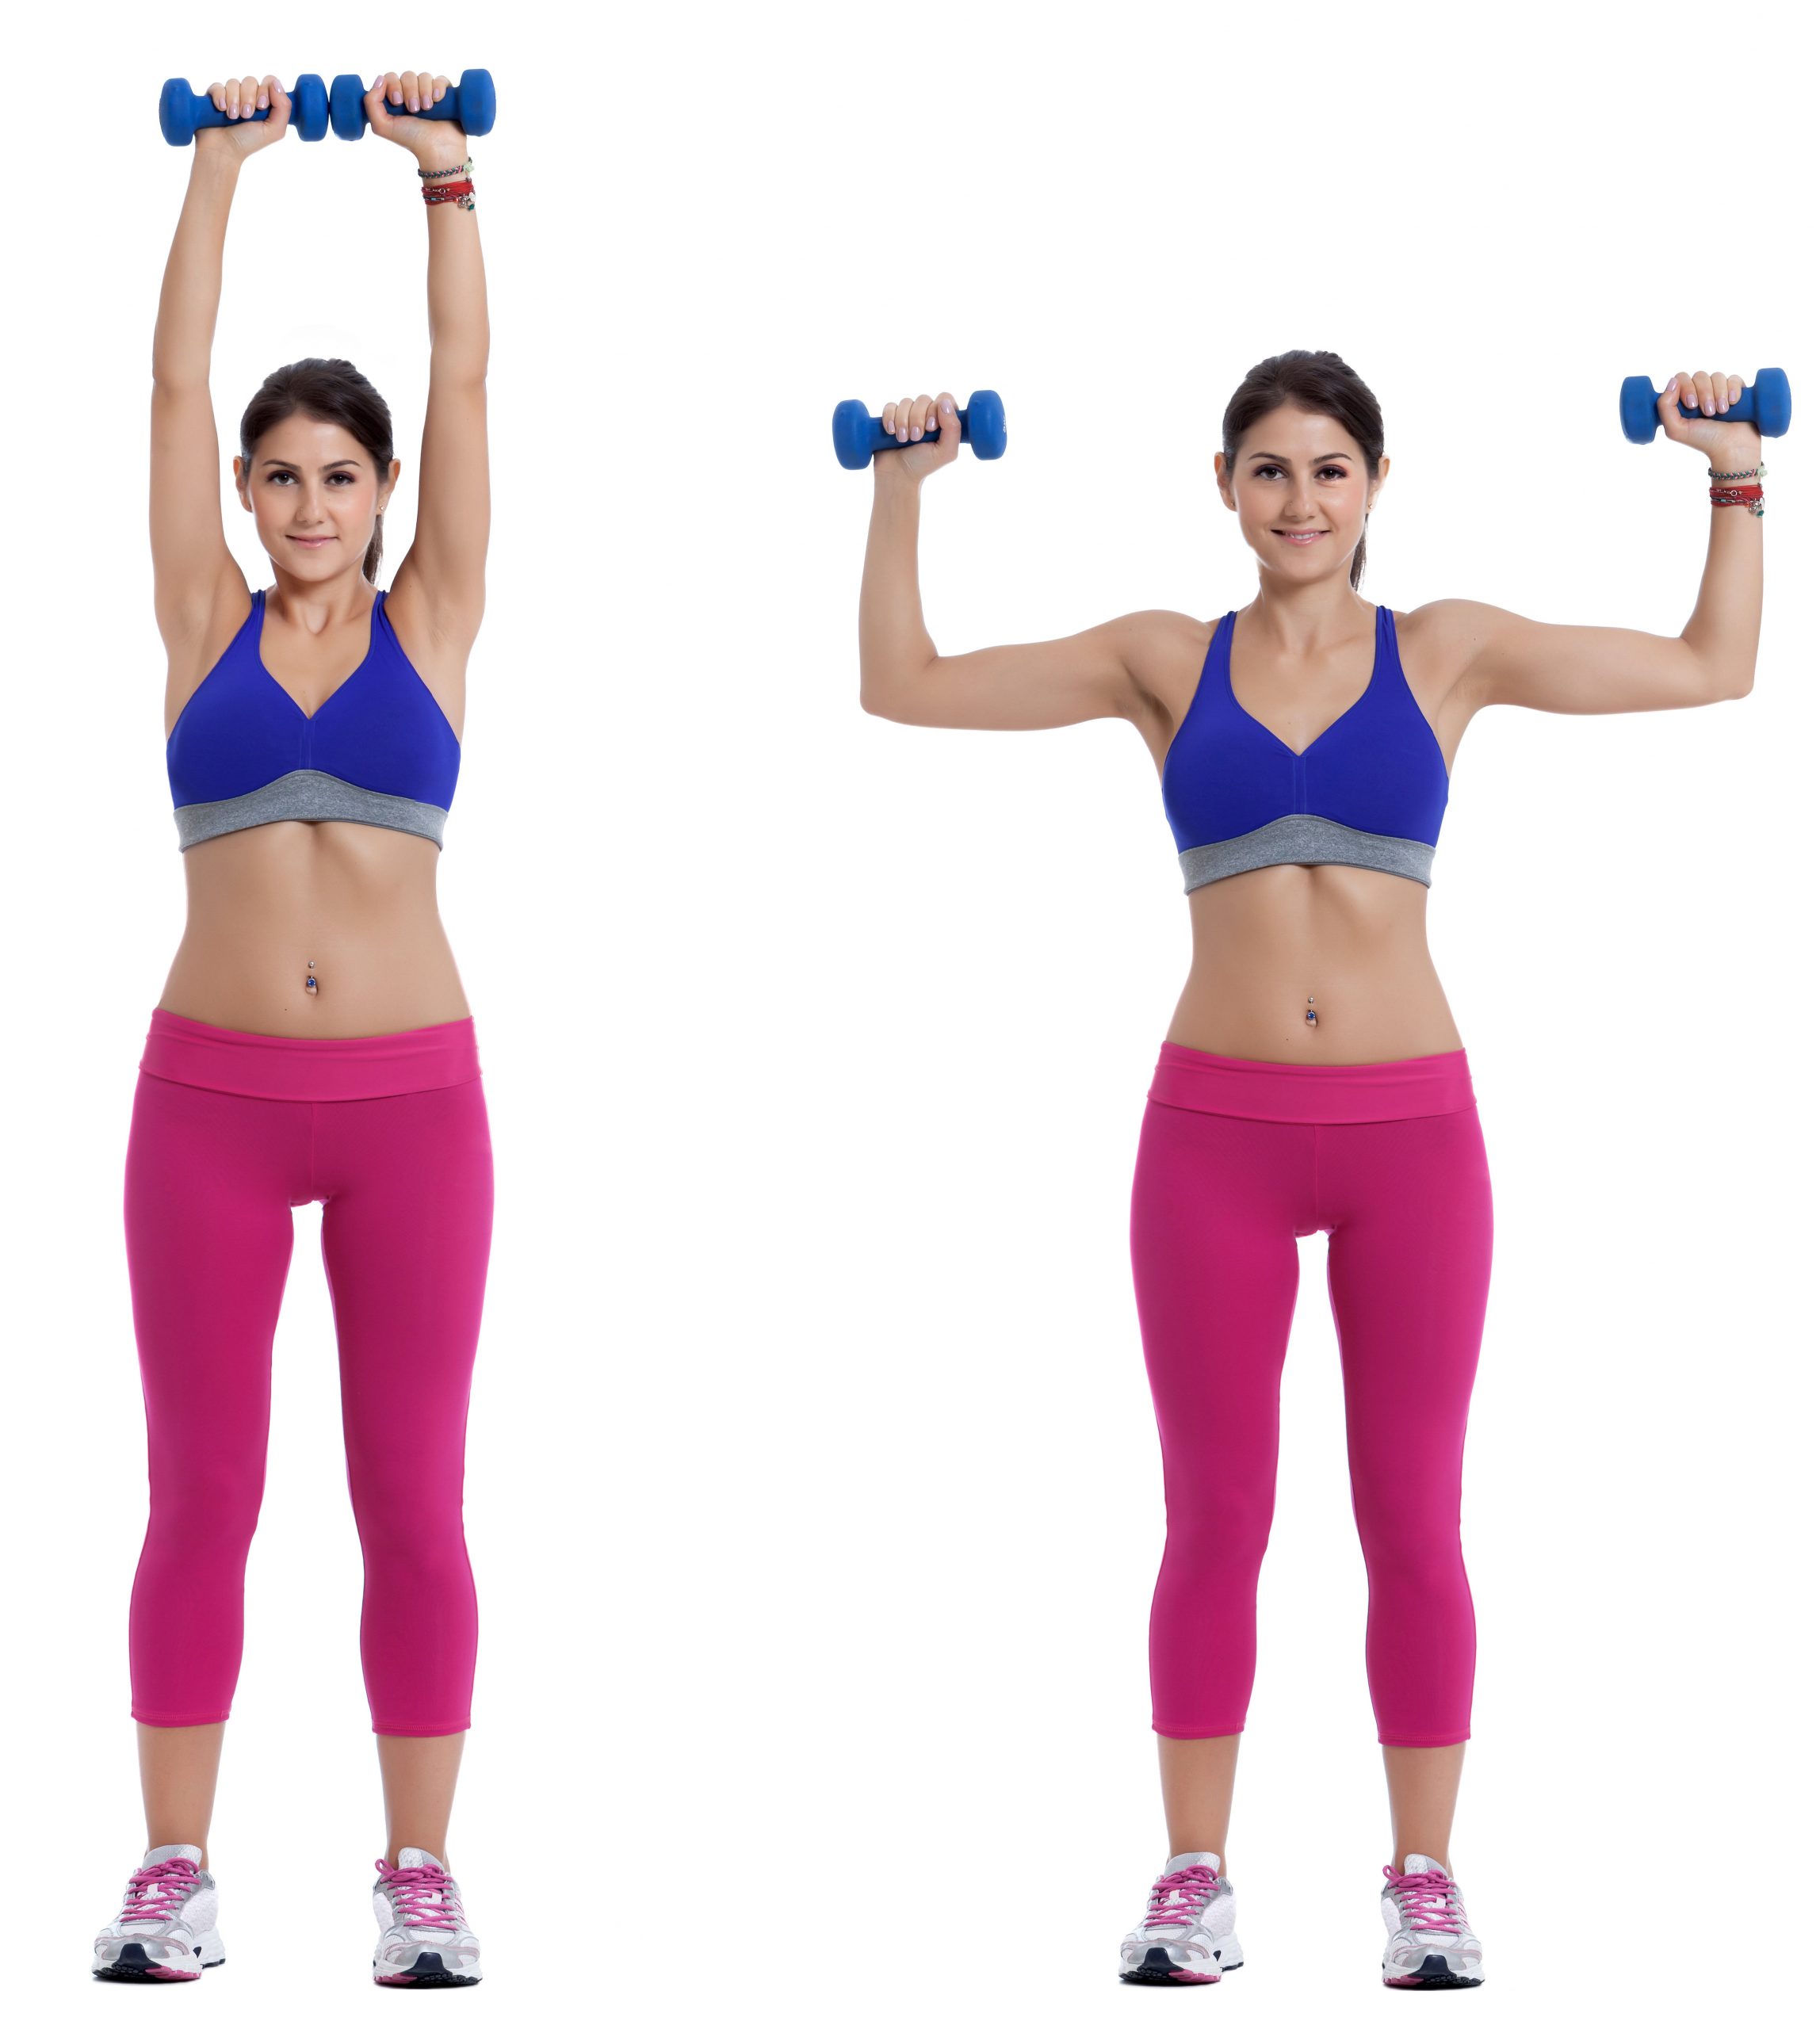 Increase Upper Body Strength With These Moves